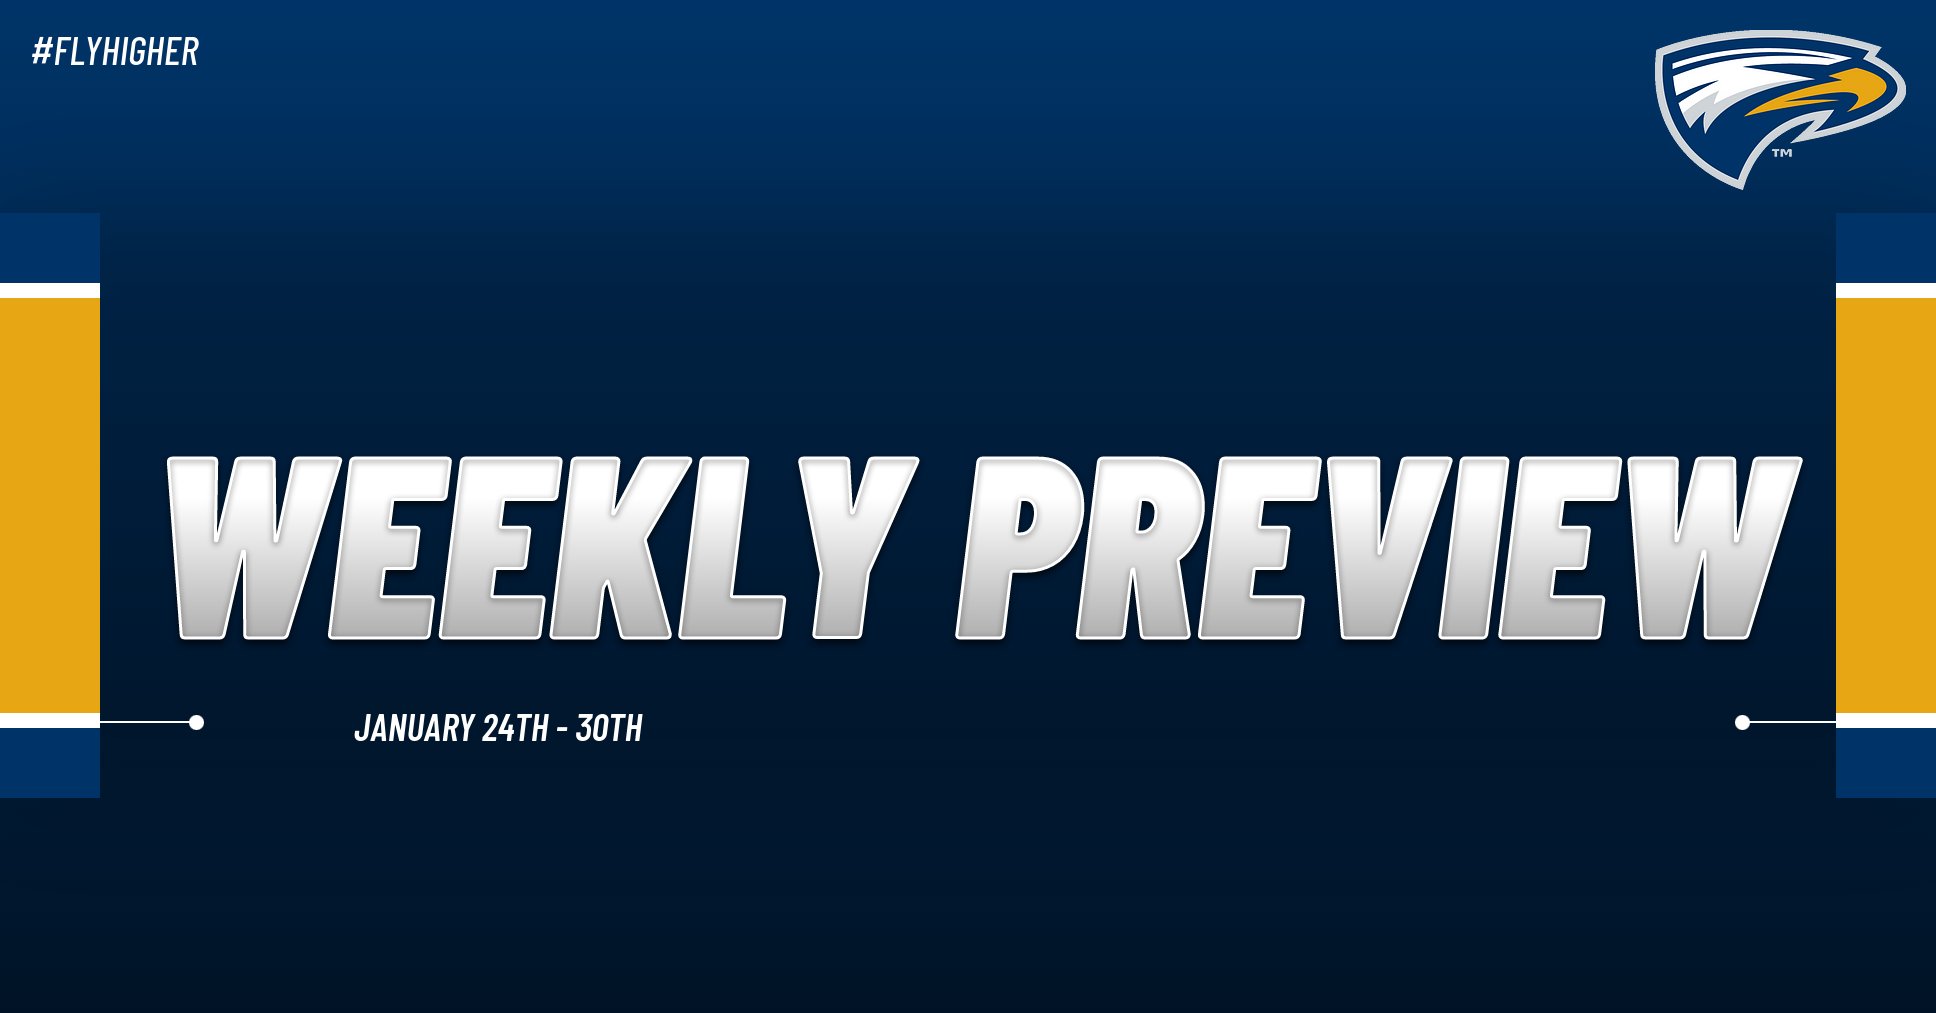 Emory Athletics Weekly Preview: January 24th - 30th